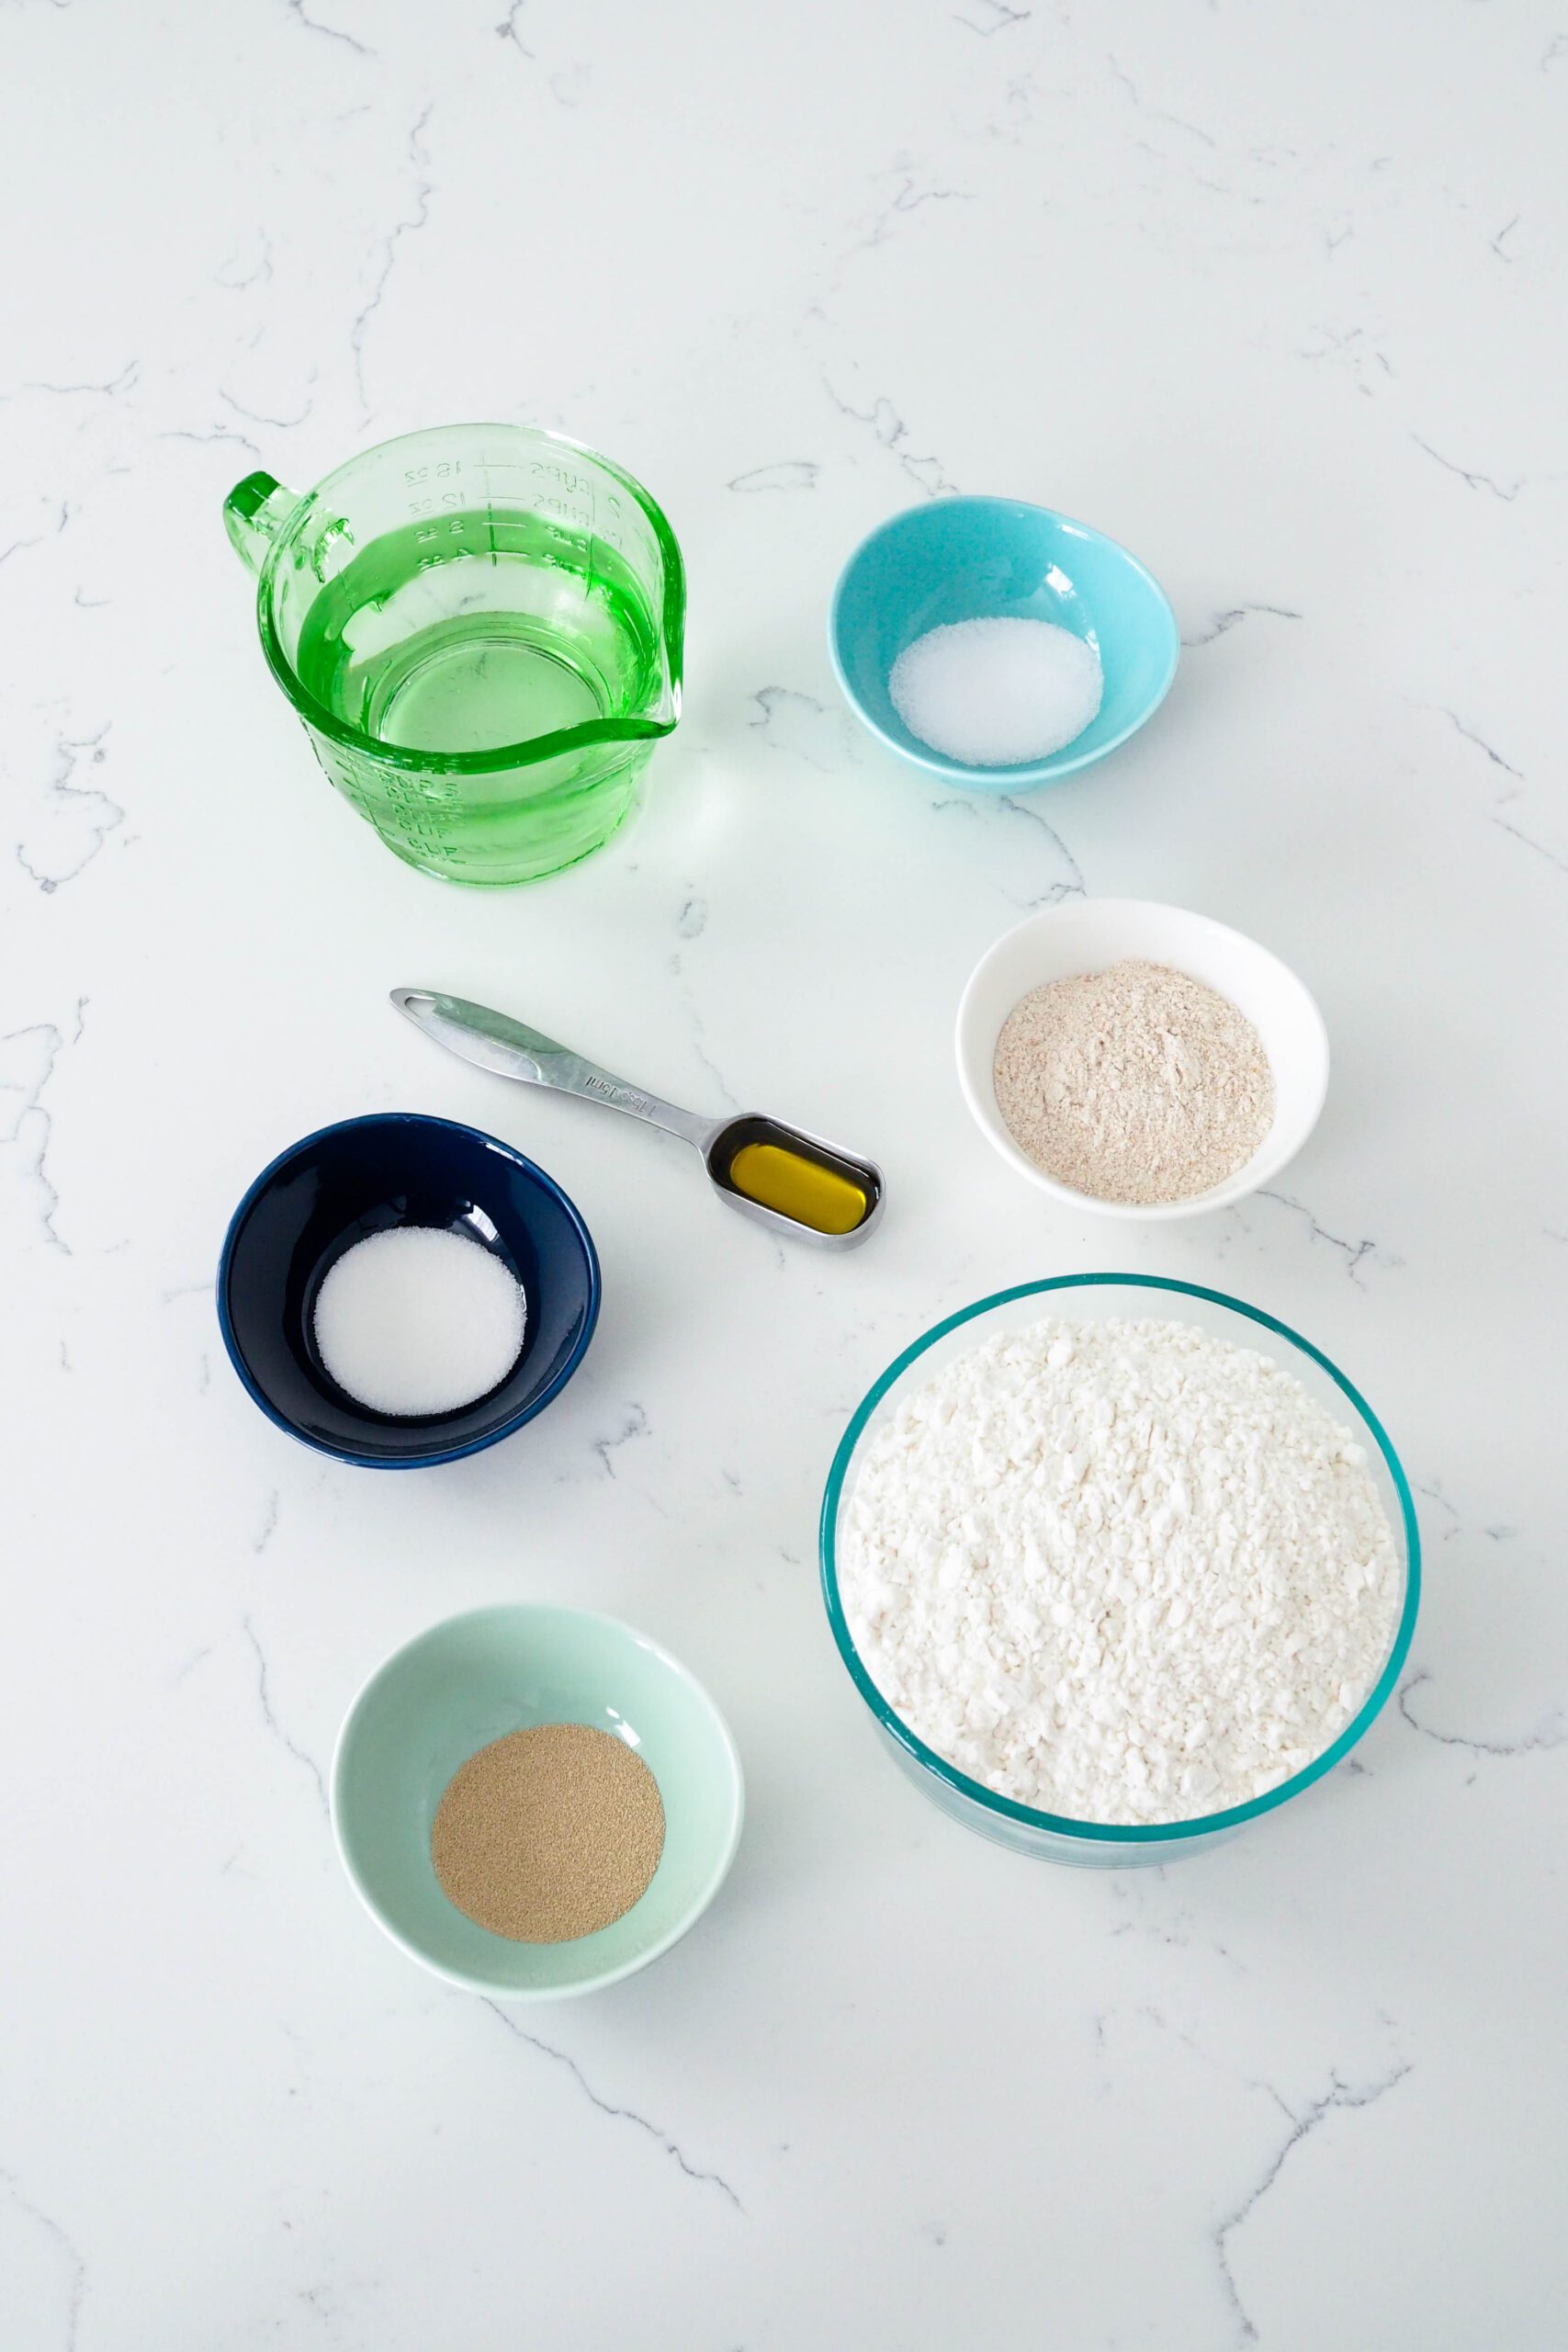 Ingredients for thin crust pizza dough.